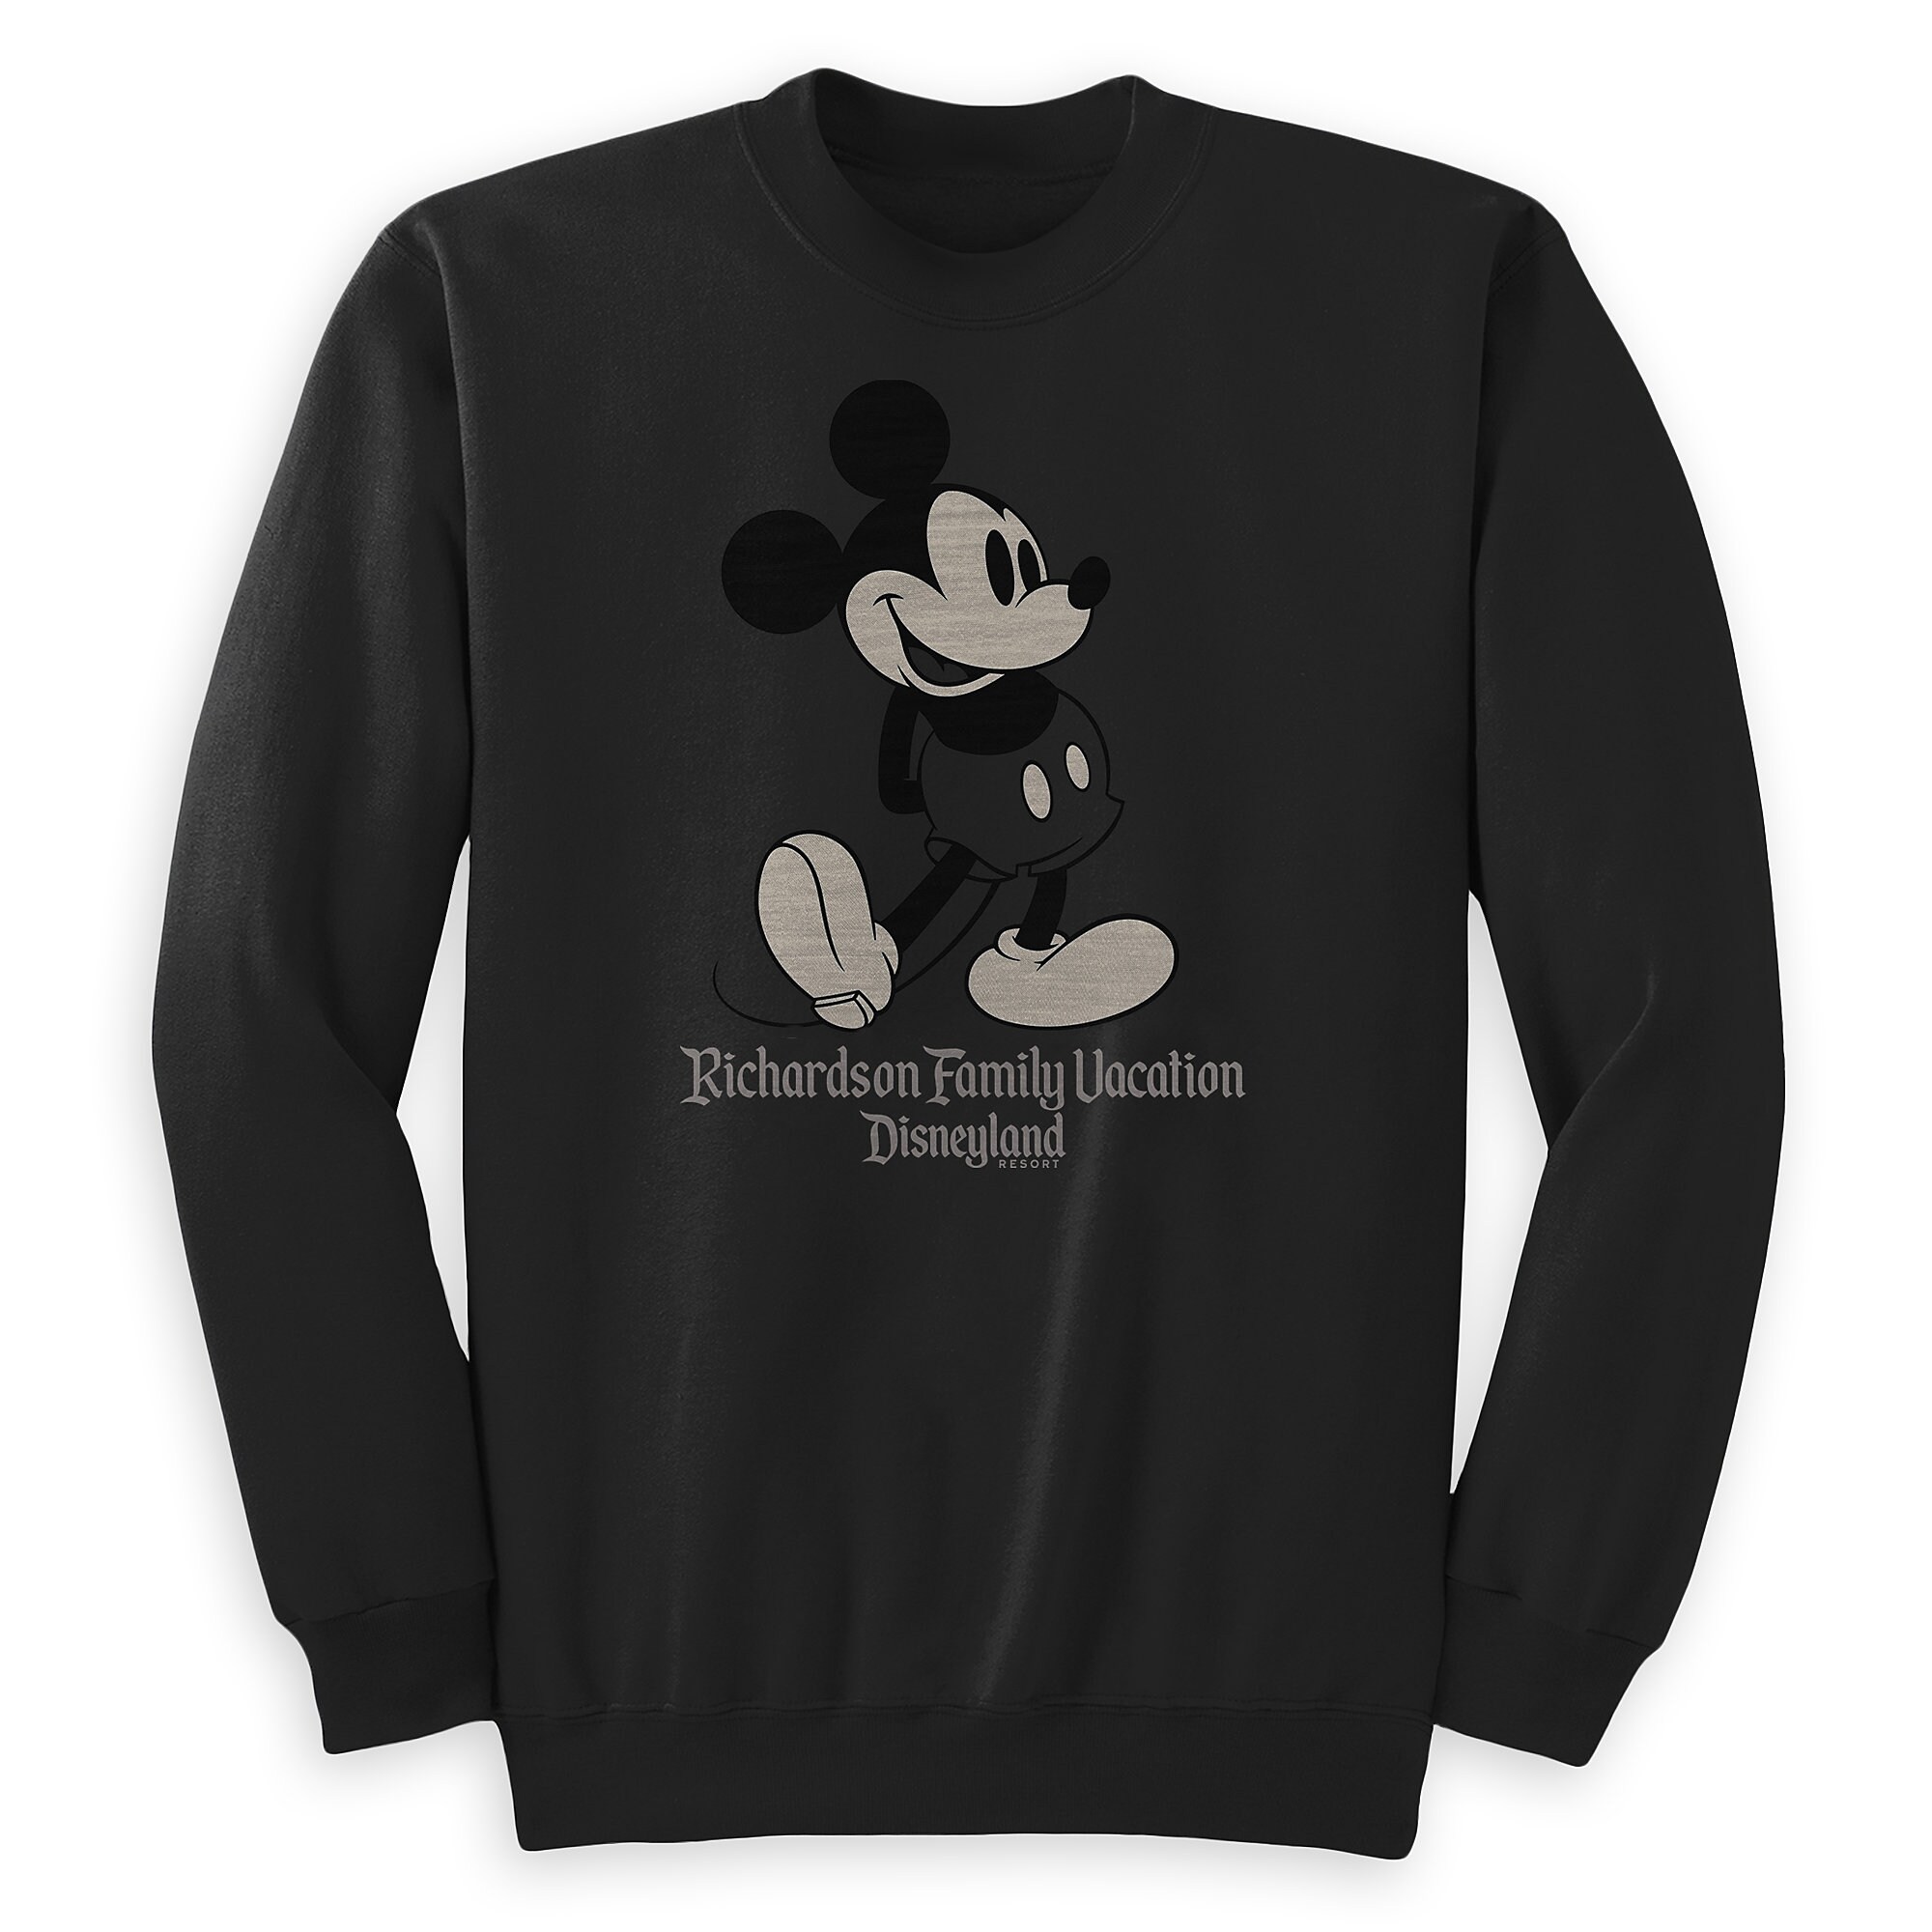 Kids' Mickey Mouse Family Vacation Pullover - Disneyland - Customized